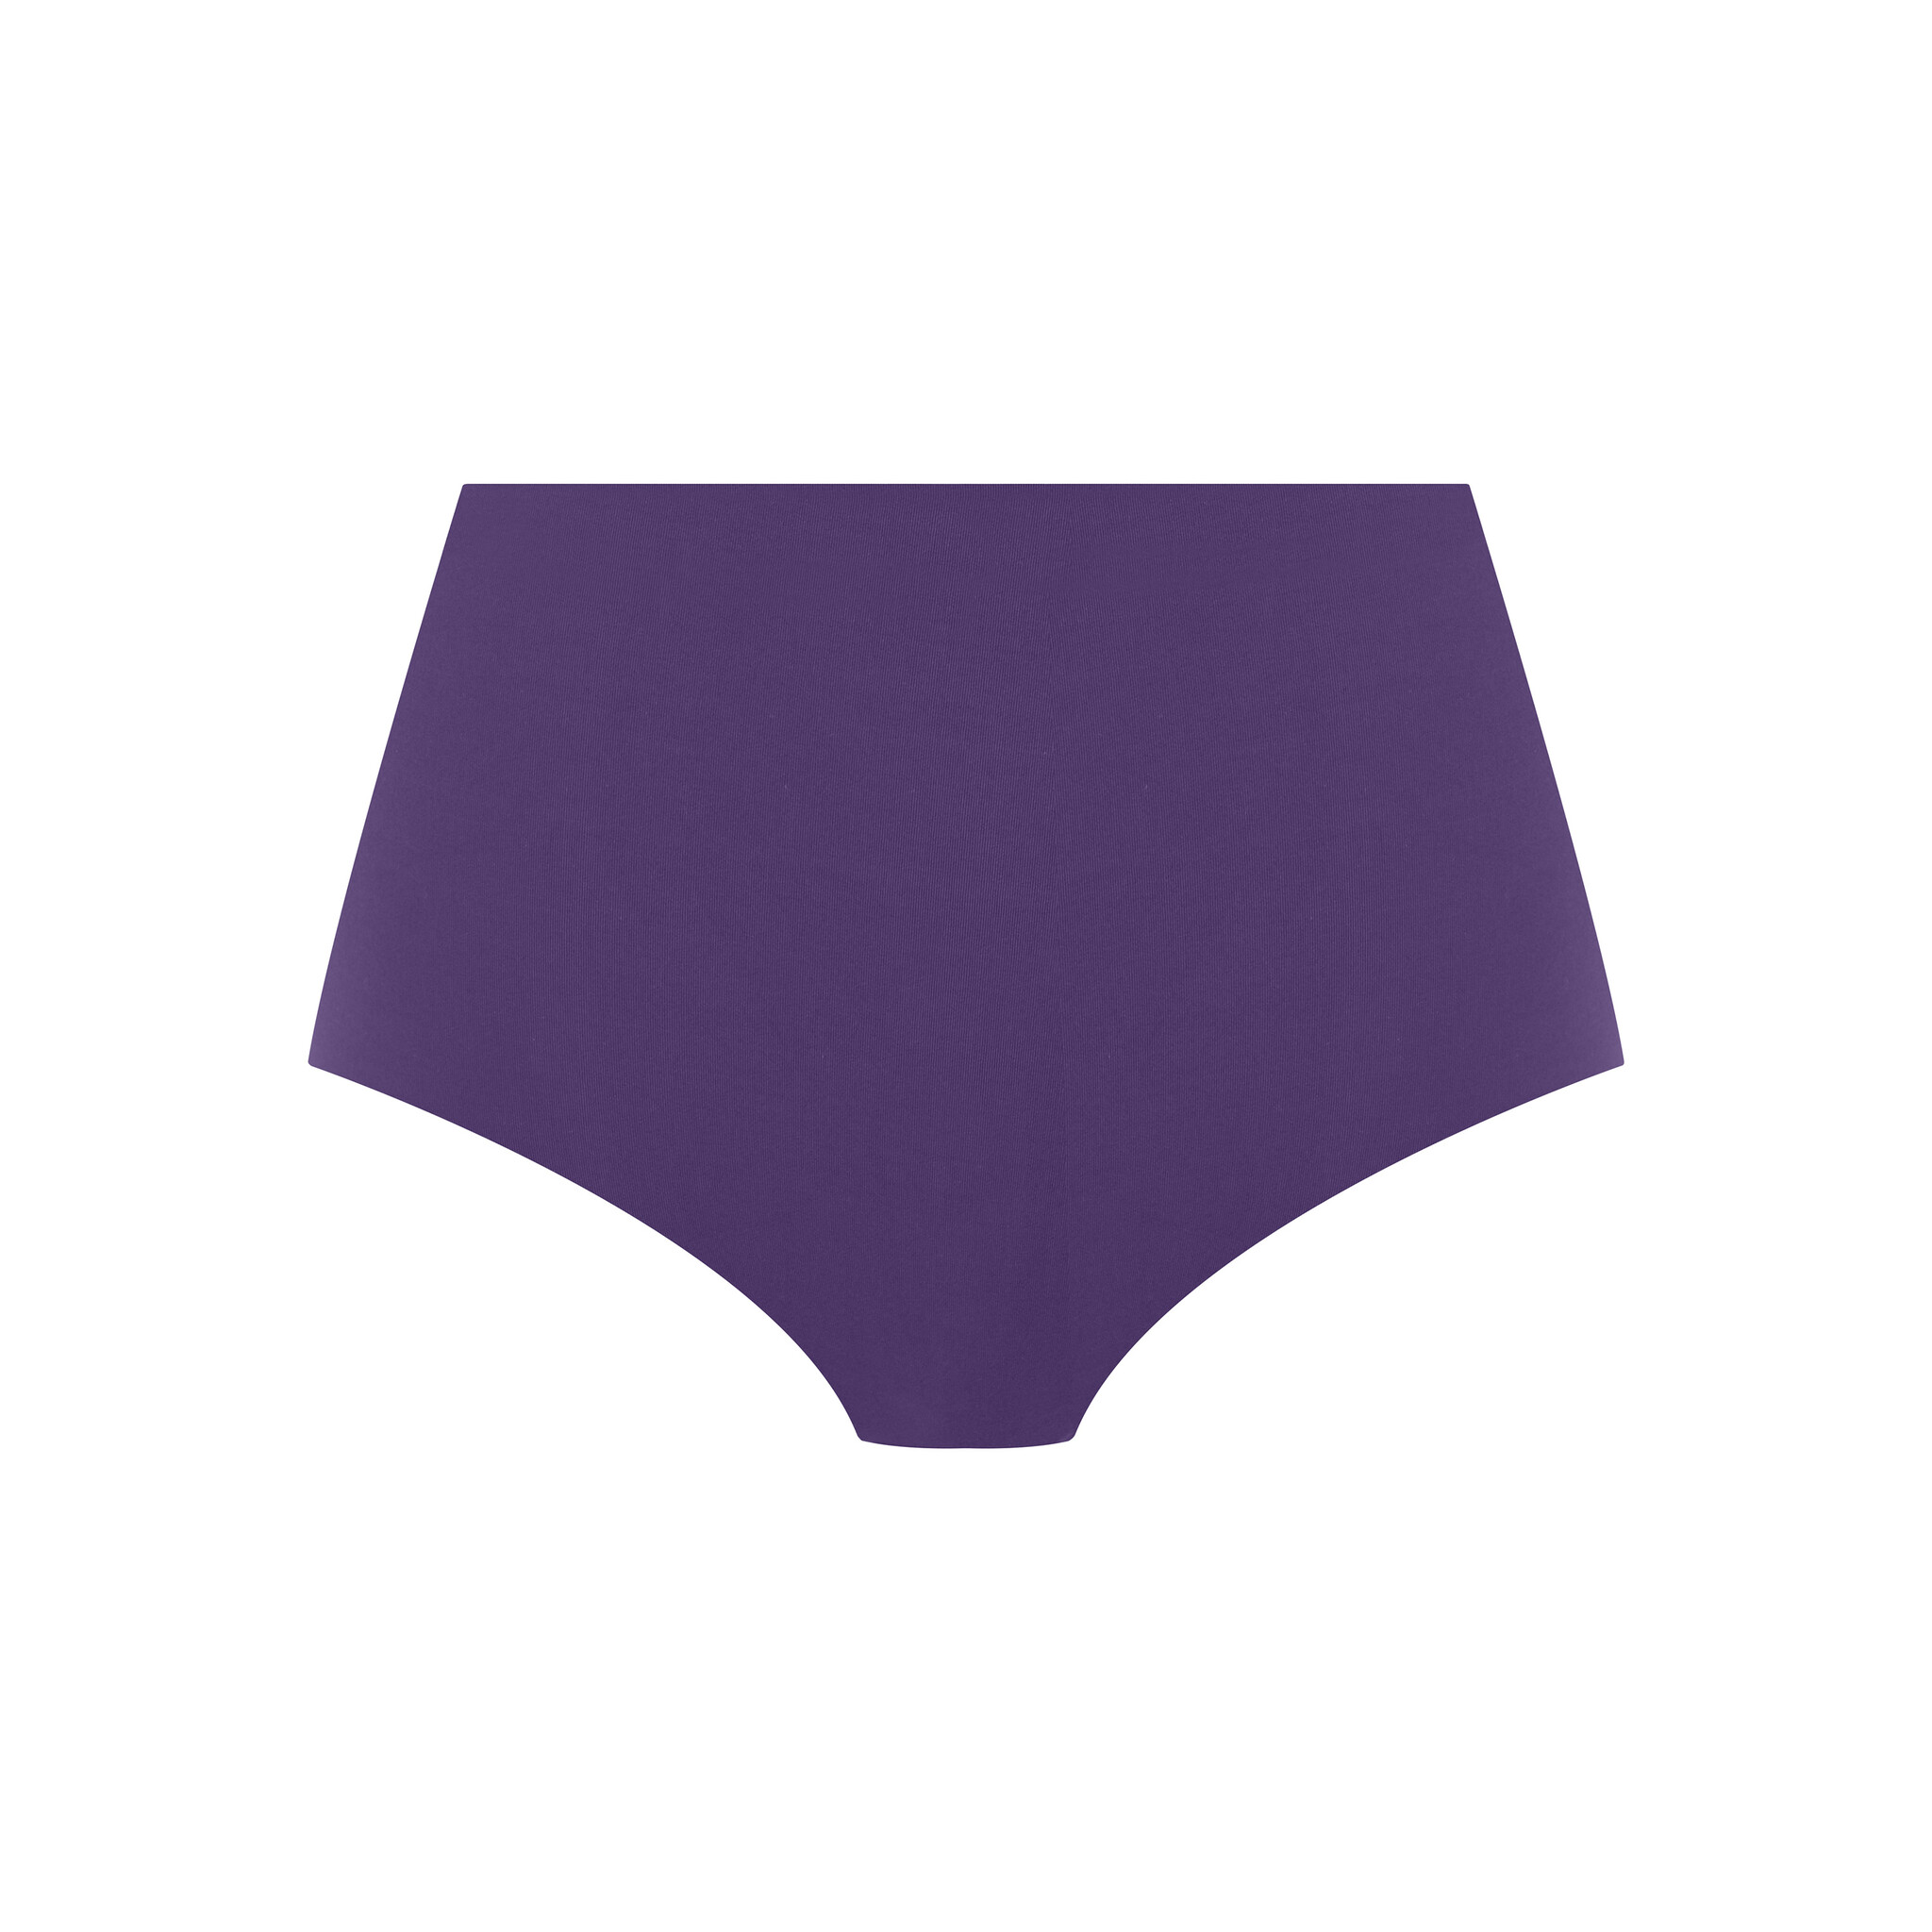 Smooth Ease Slip Invisible Full Brief